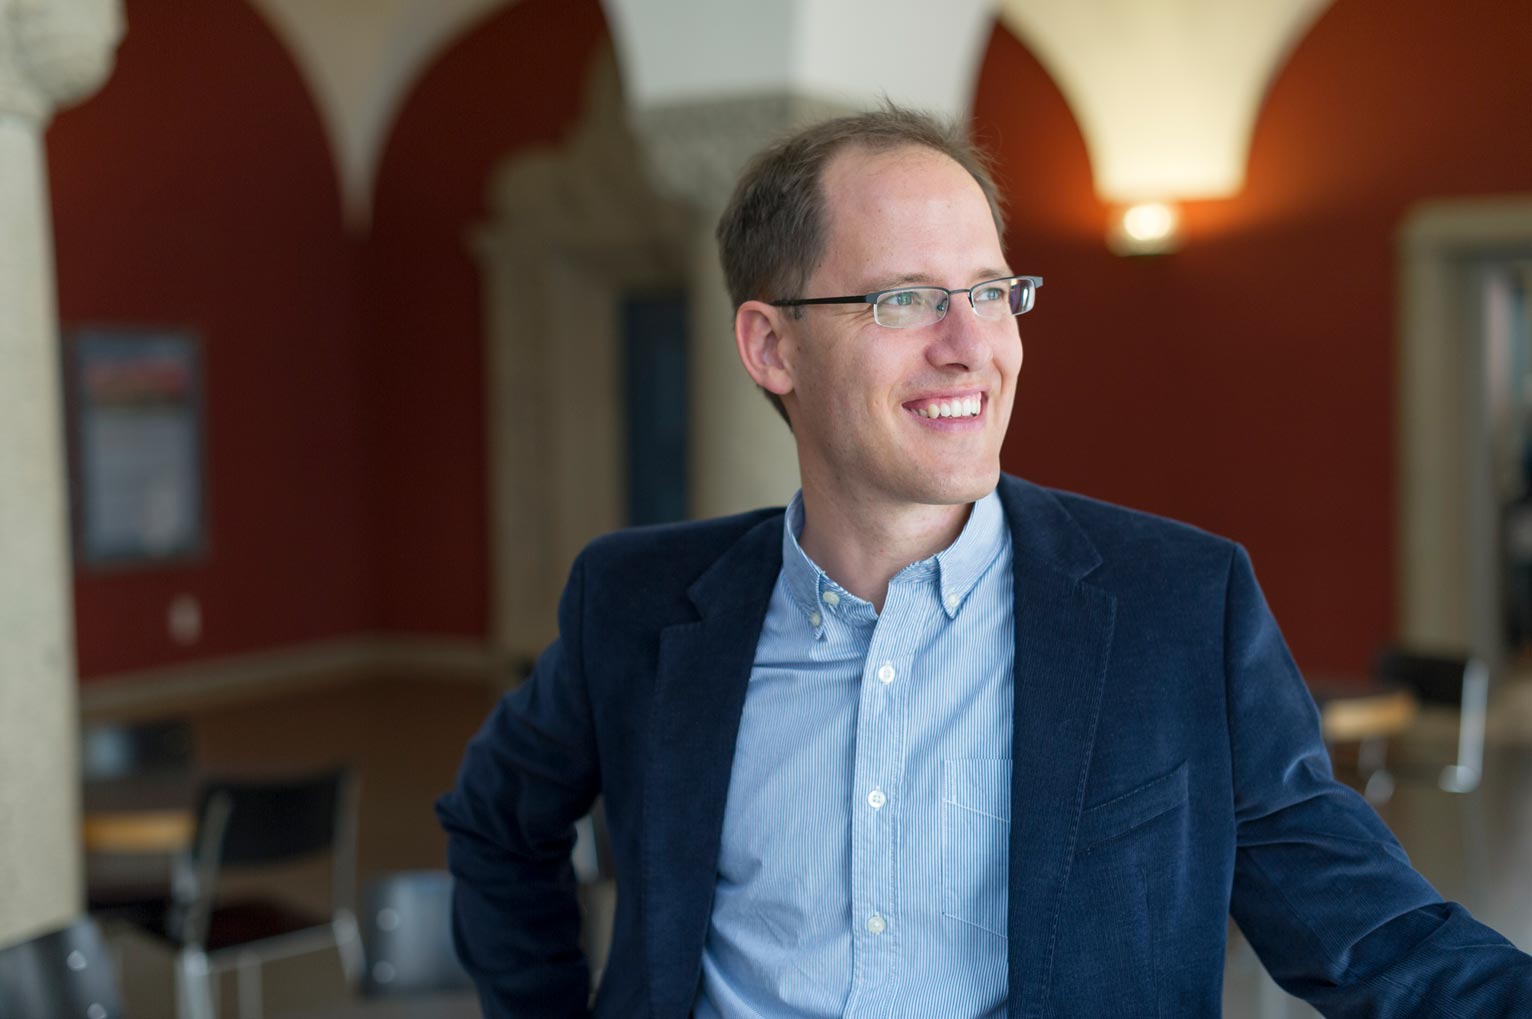 Florian Scheuer is Professor of Economics of Institutions at the University of Zurich. His areas of expertise include economic inequality, political economy and tax policy.